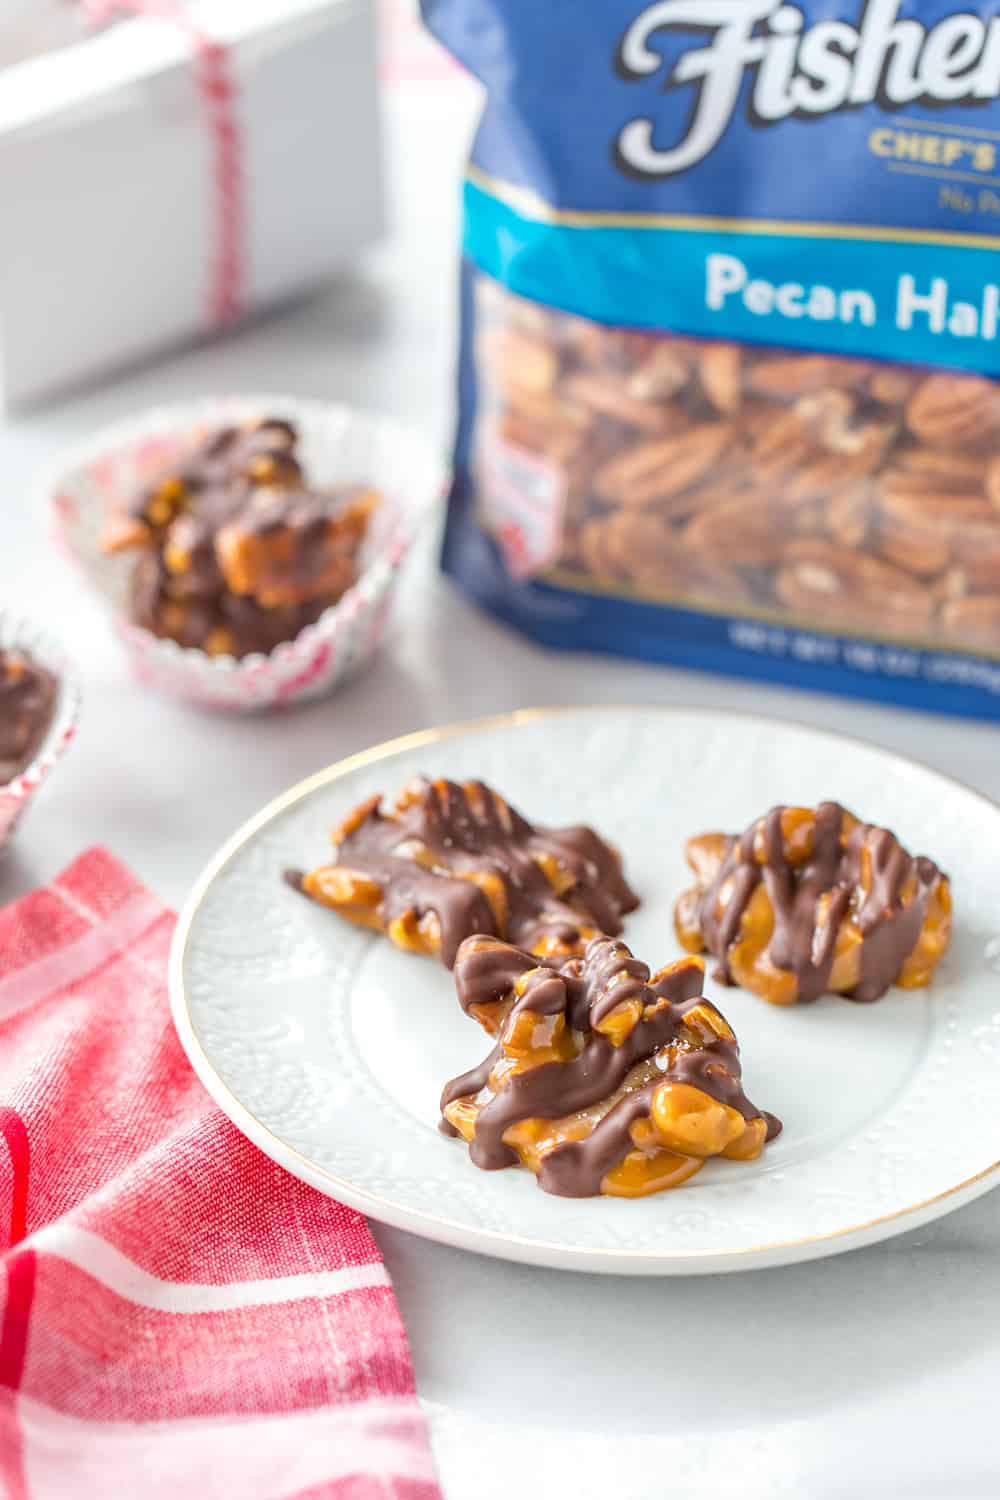 Caramel Pecan Clusters are salty, sweet and  they're perfect for gift giving. Package them up in a cute box with ribbon to really wow the caramel lover in your life!